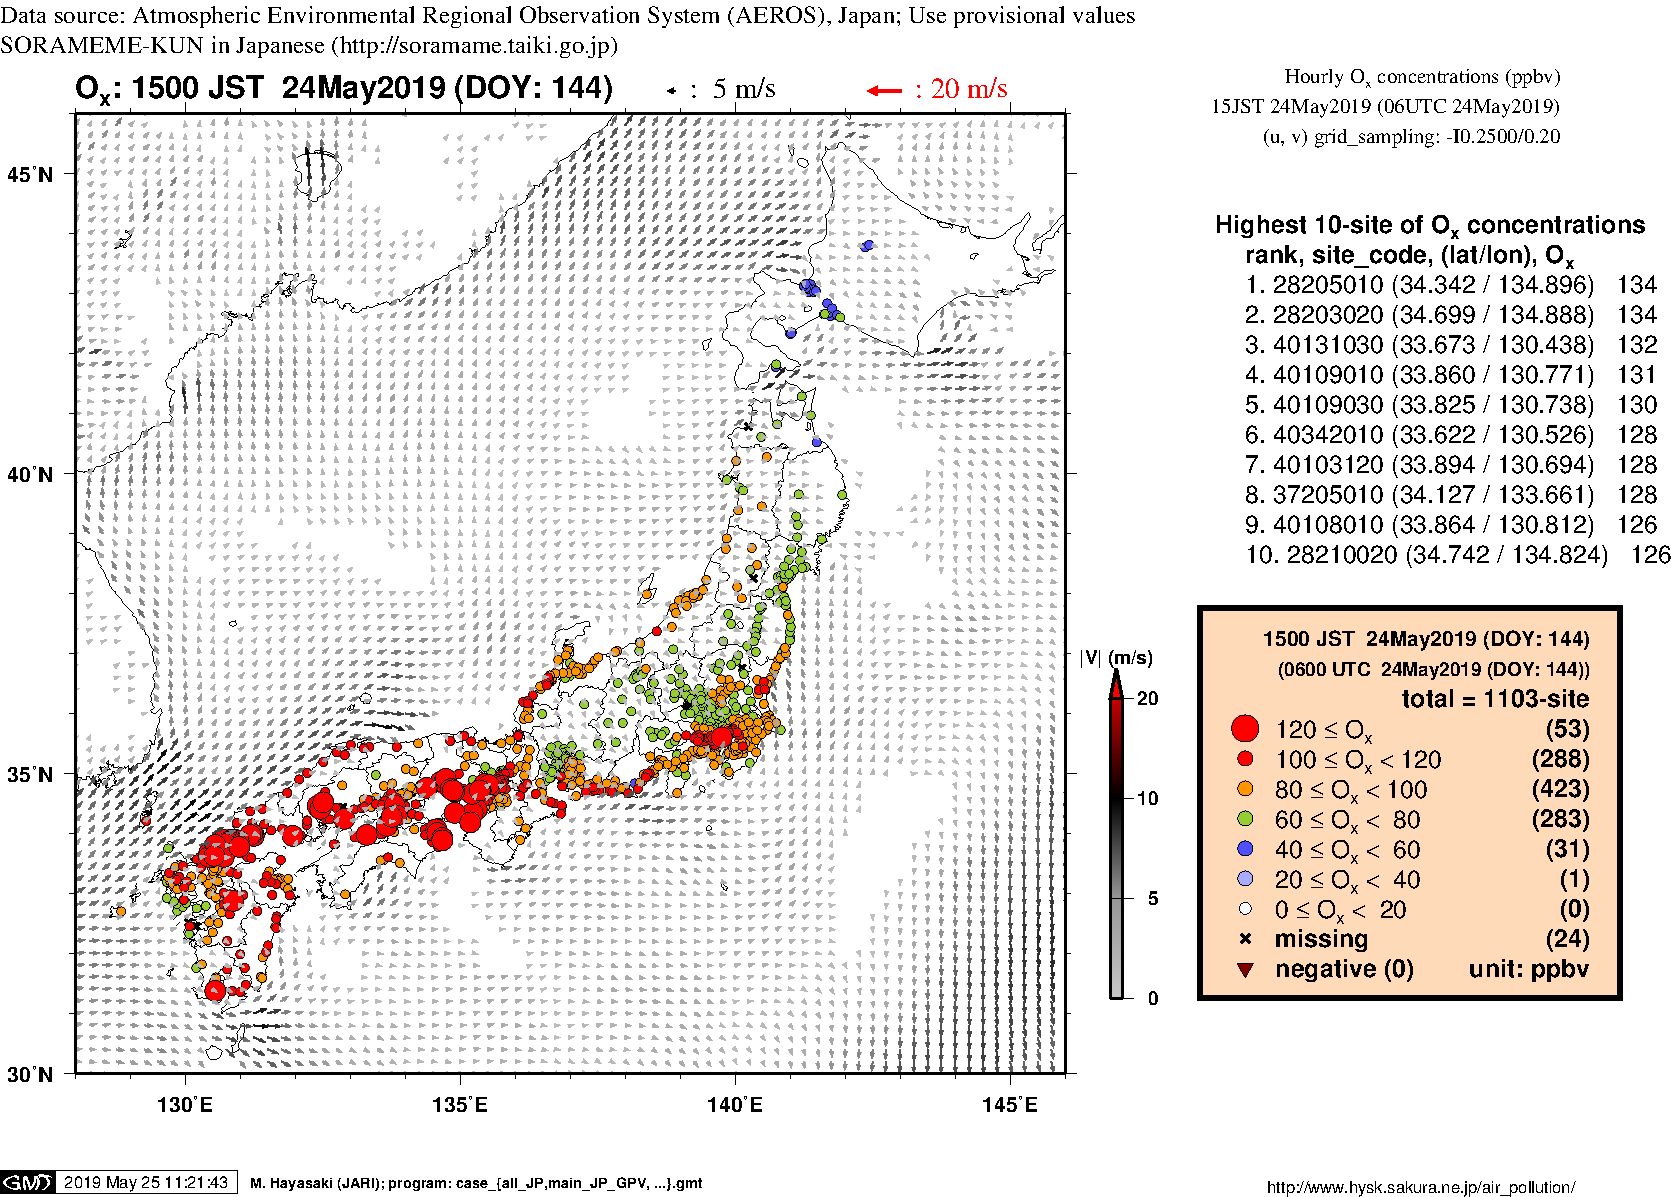 Ox concentration in mainland Japan (15JST 24May2019)